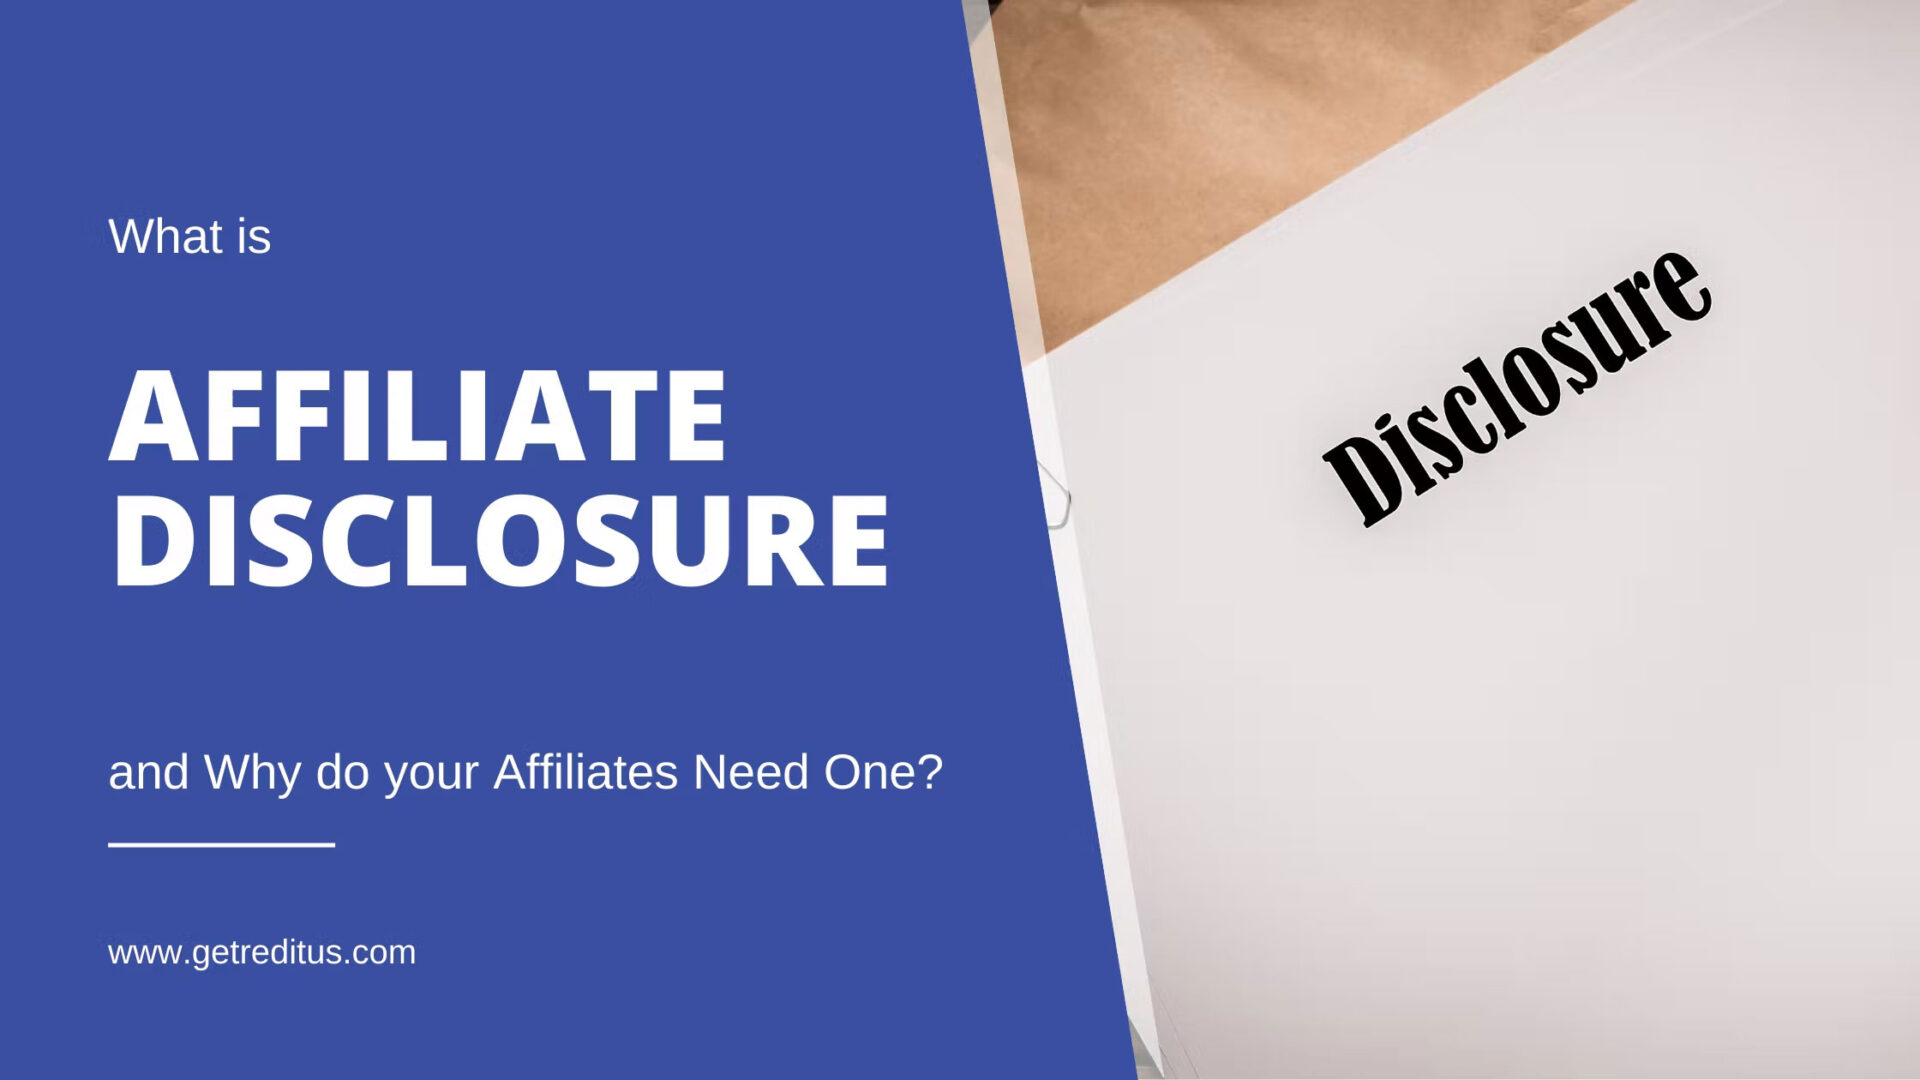 What is Affiliate Disclosure, and Why Do Your Affiliates Need One?